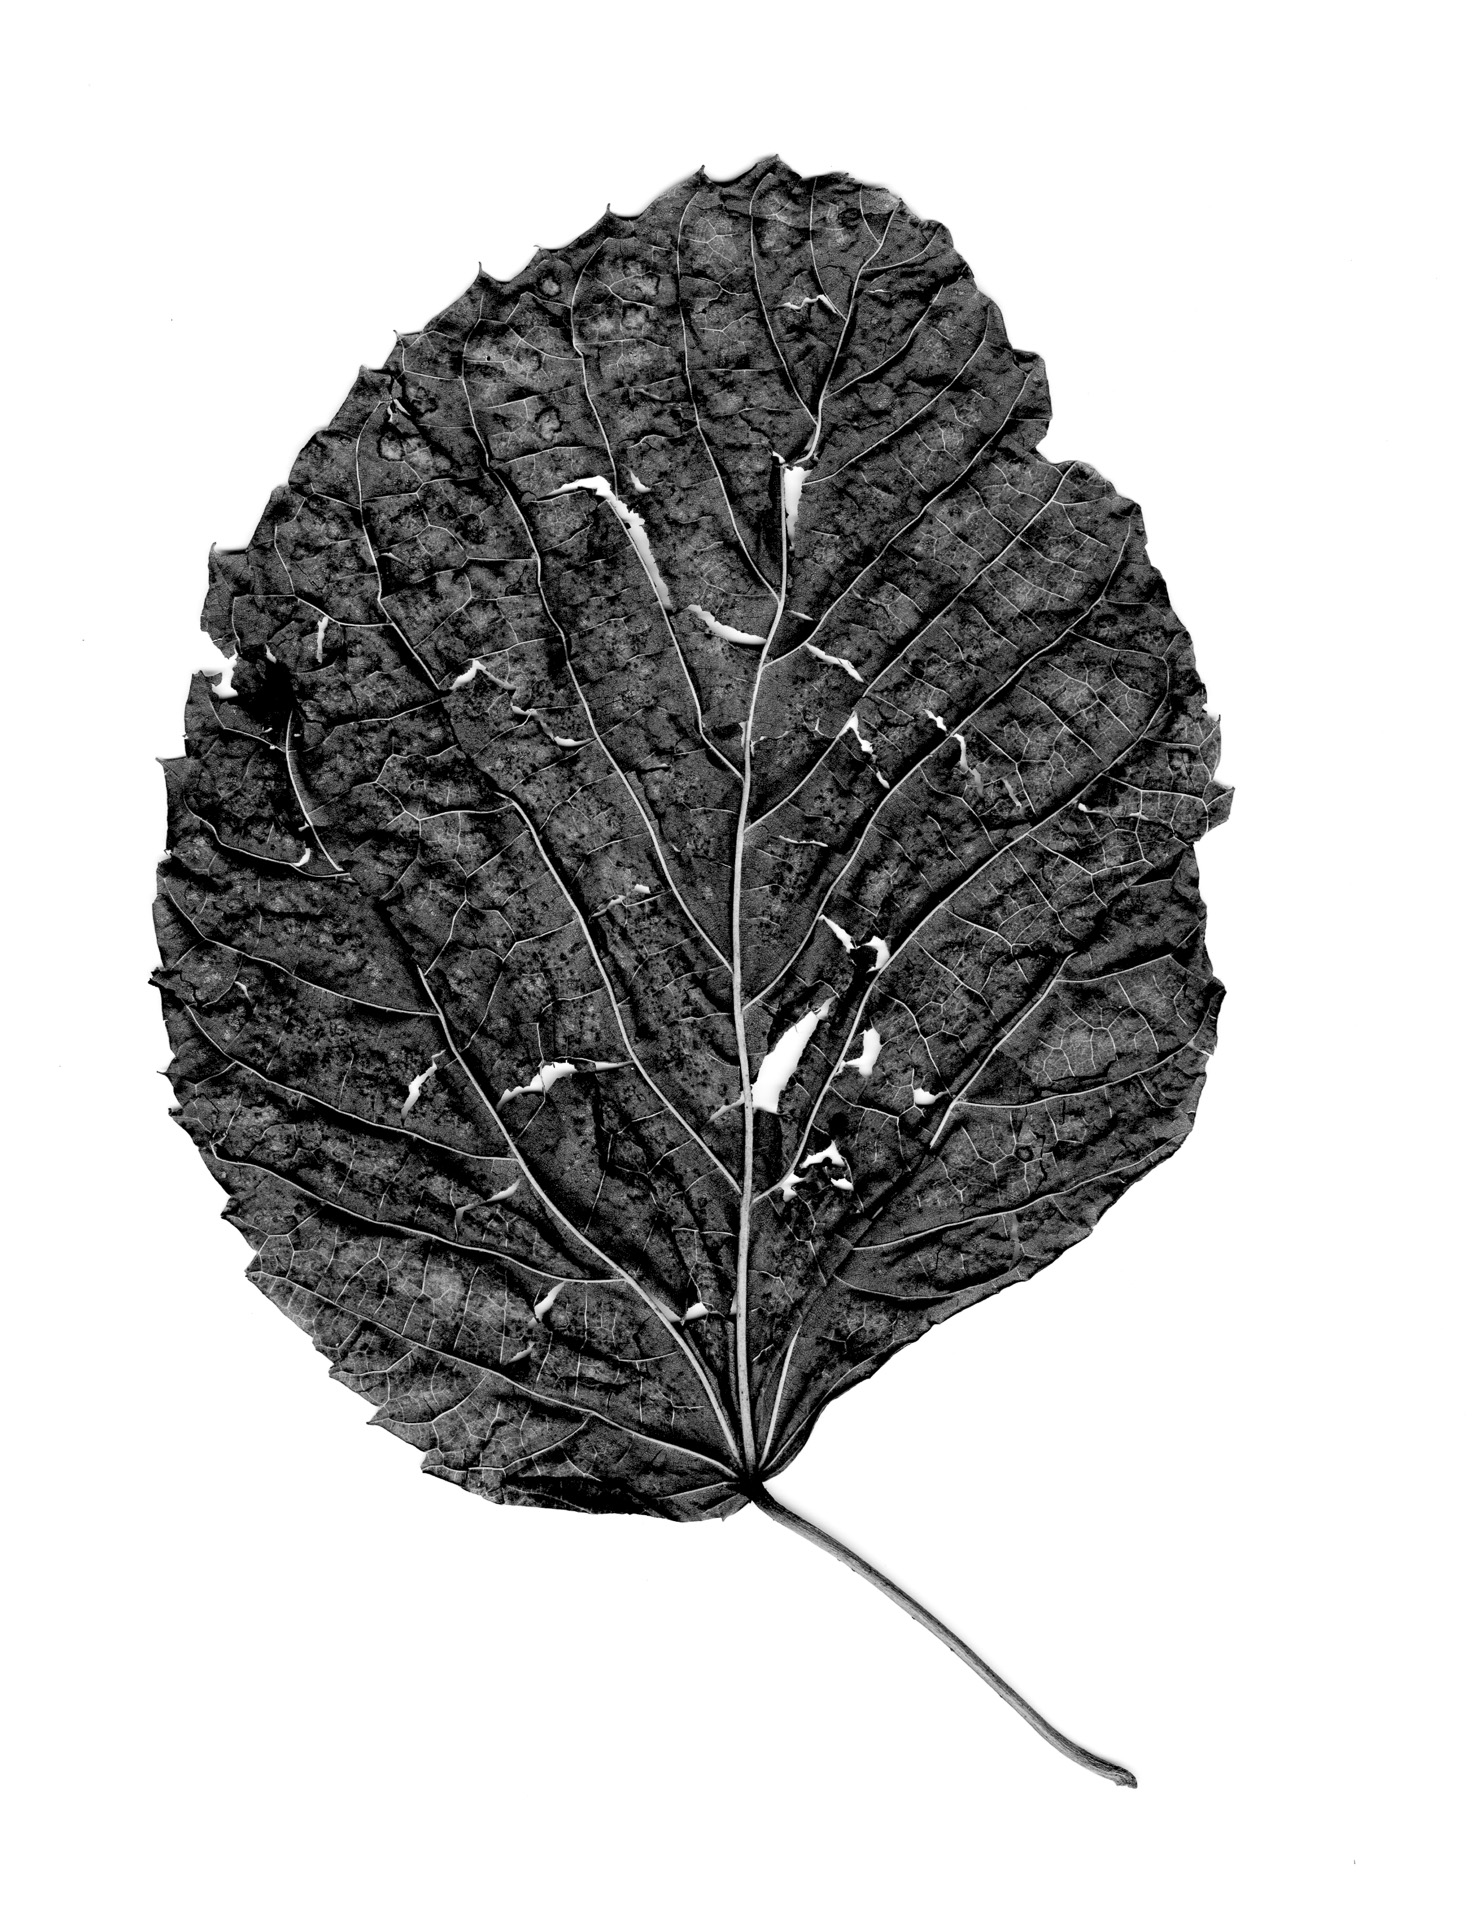 An image of a leaf on a white background